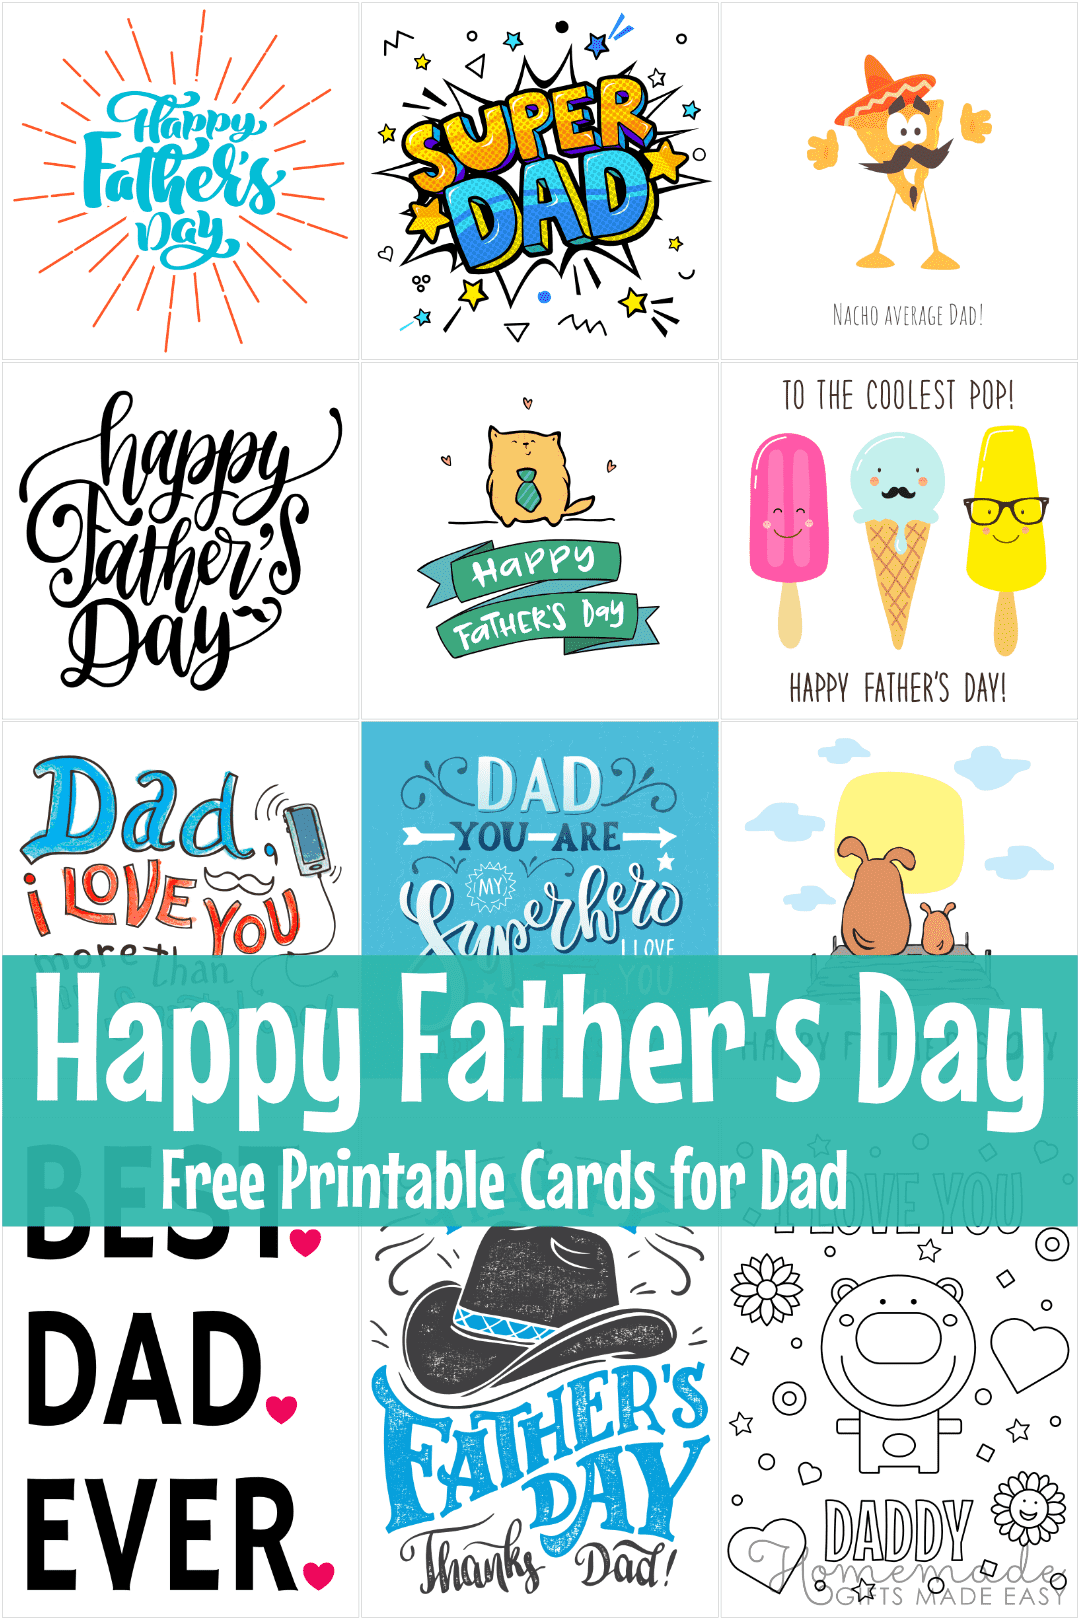 Download 76 Free Printable Father S Day Cards Download And Print At Home